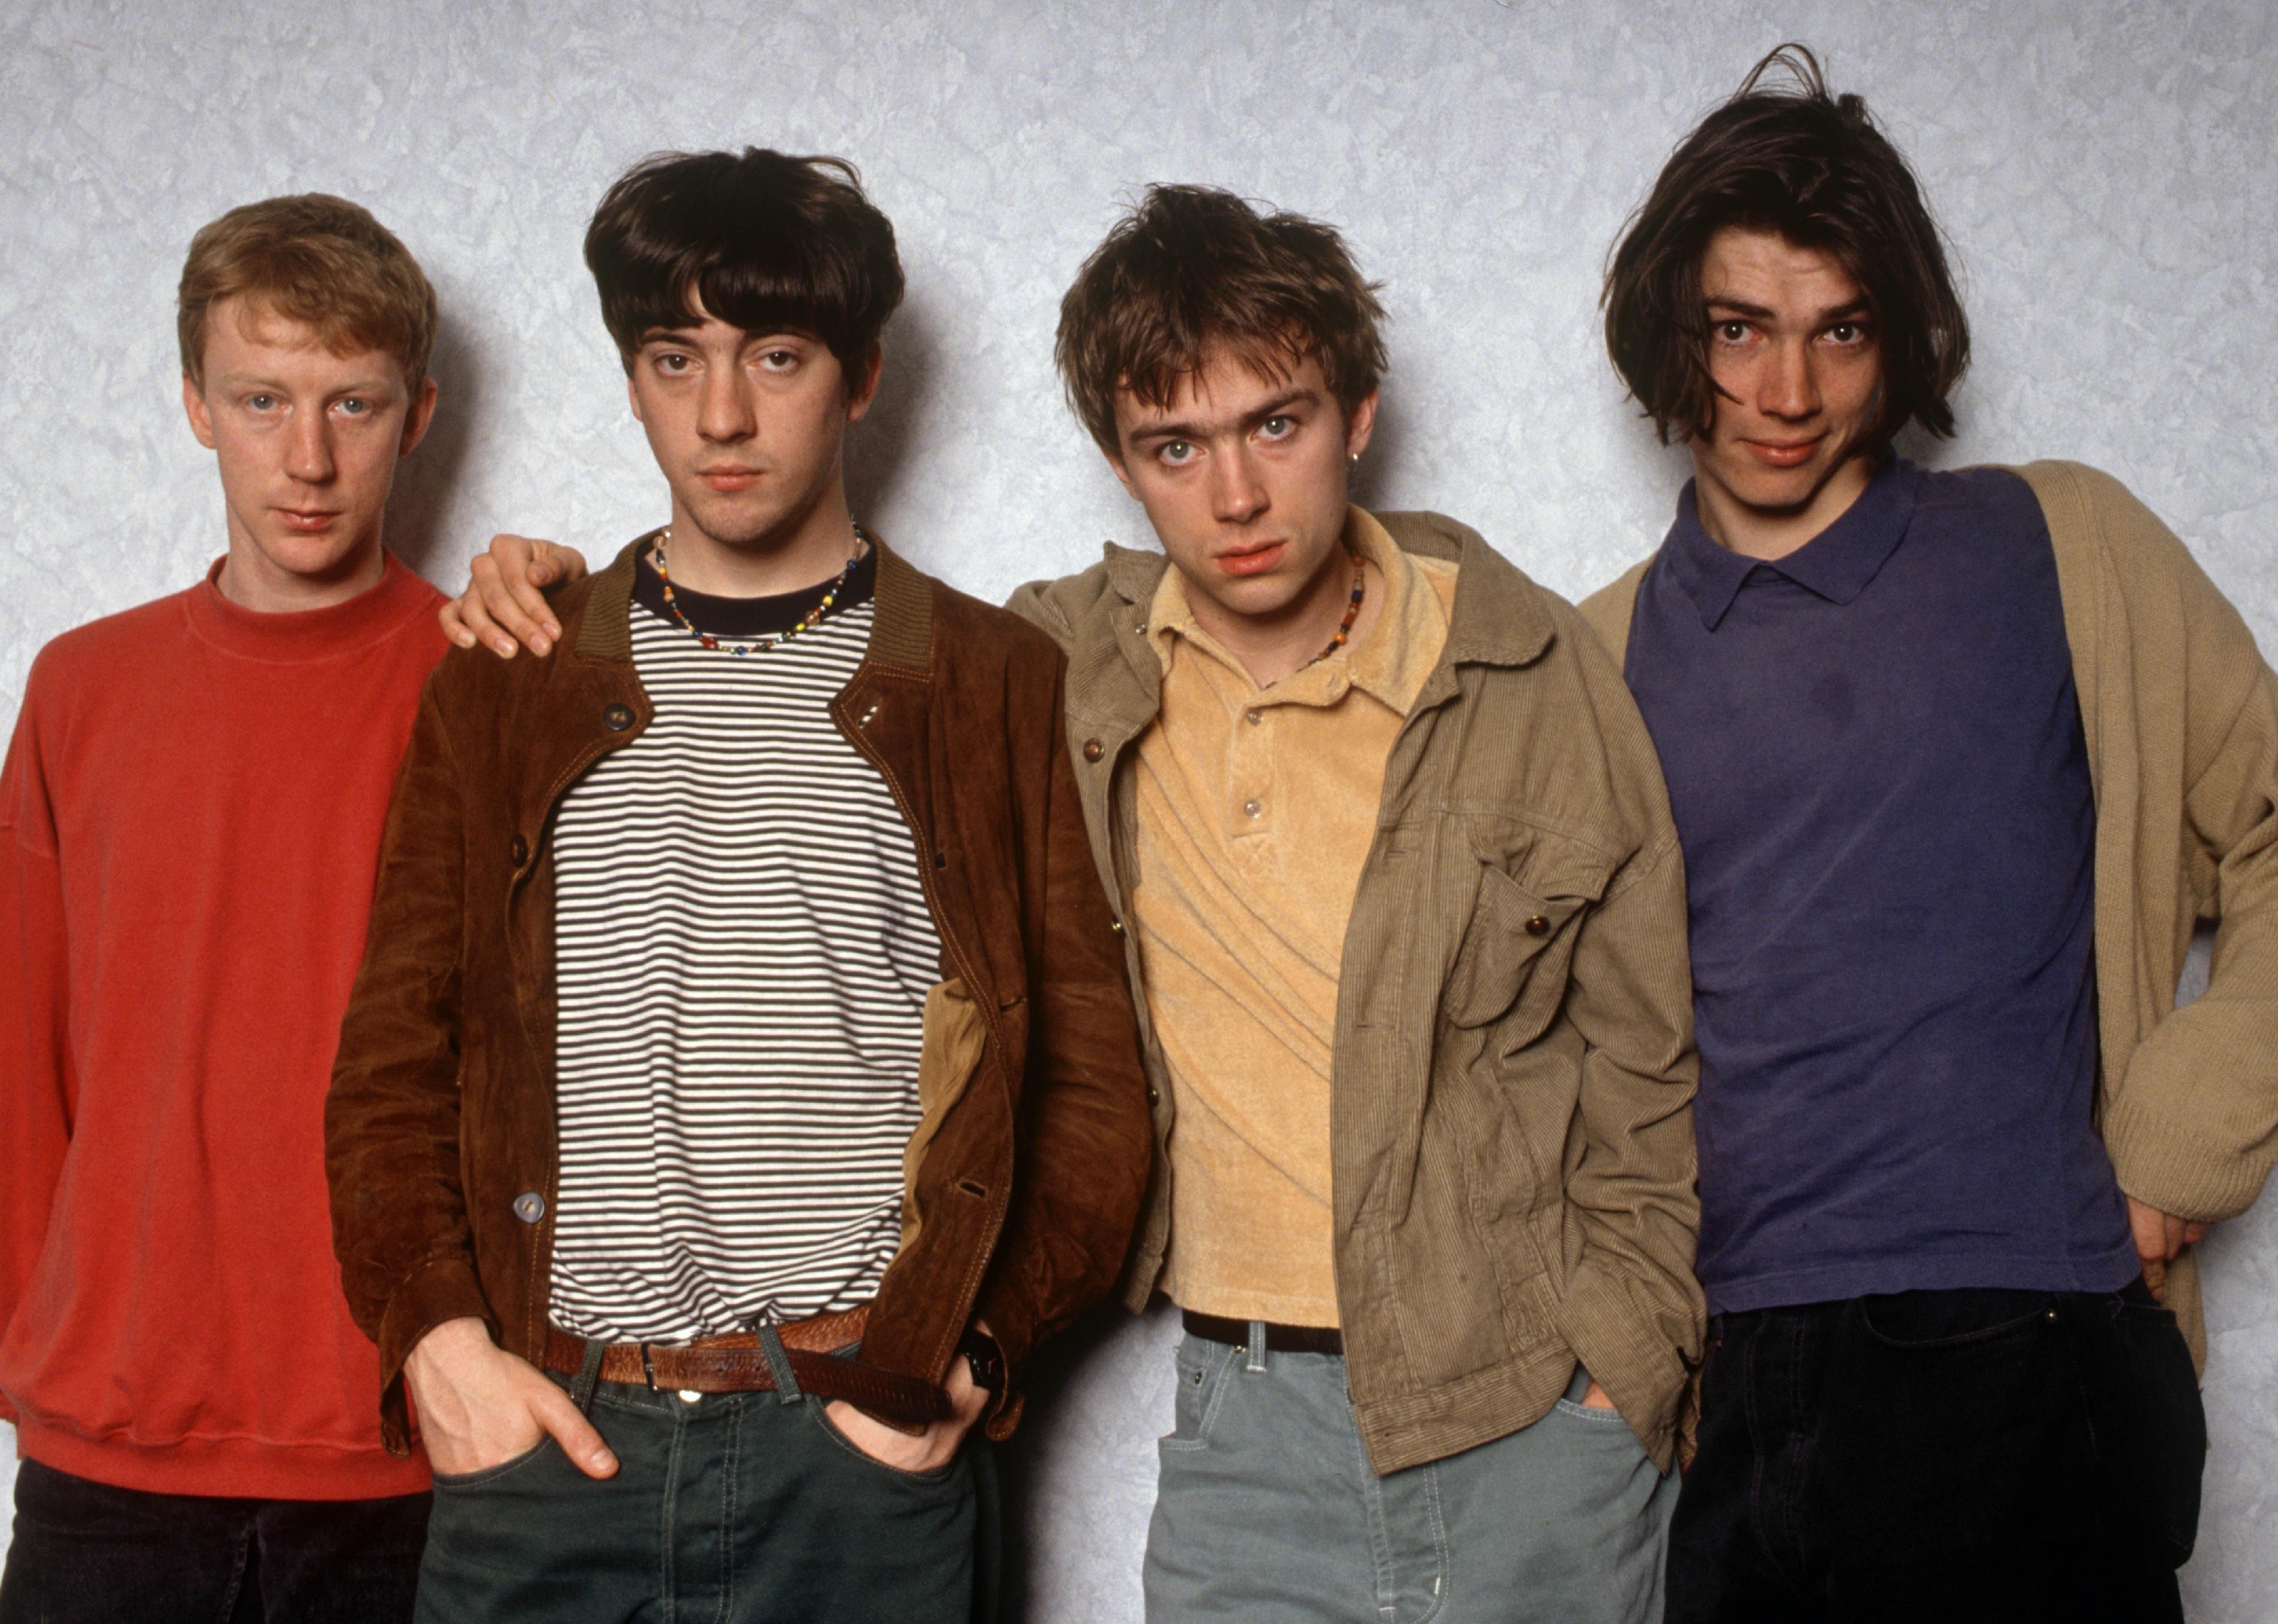 Dave Rowntree with the members of Blur.